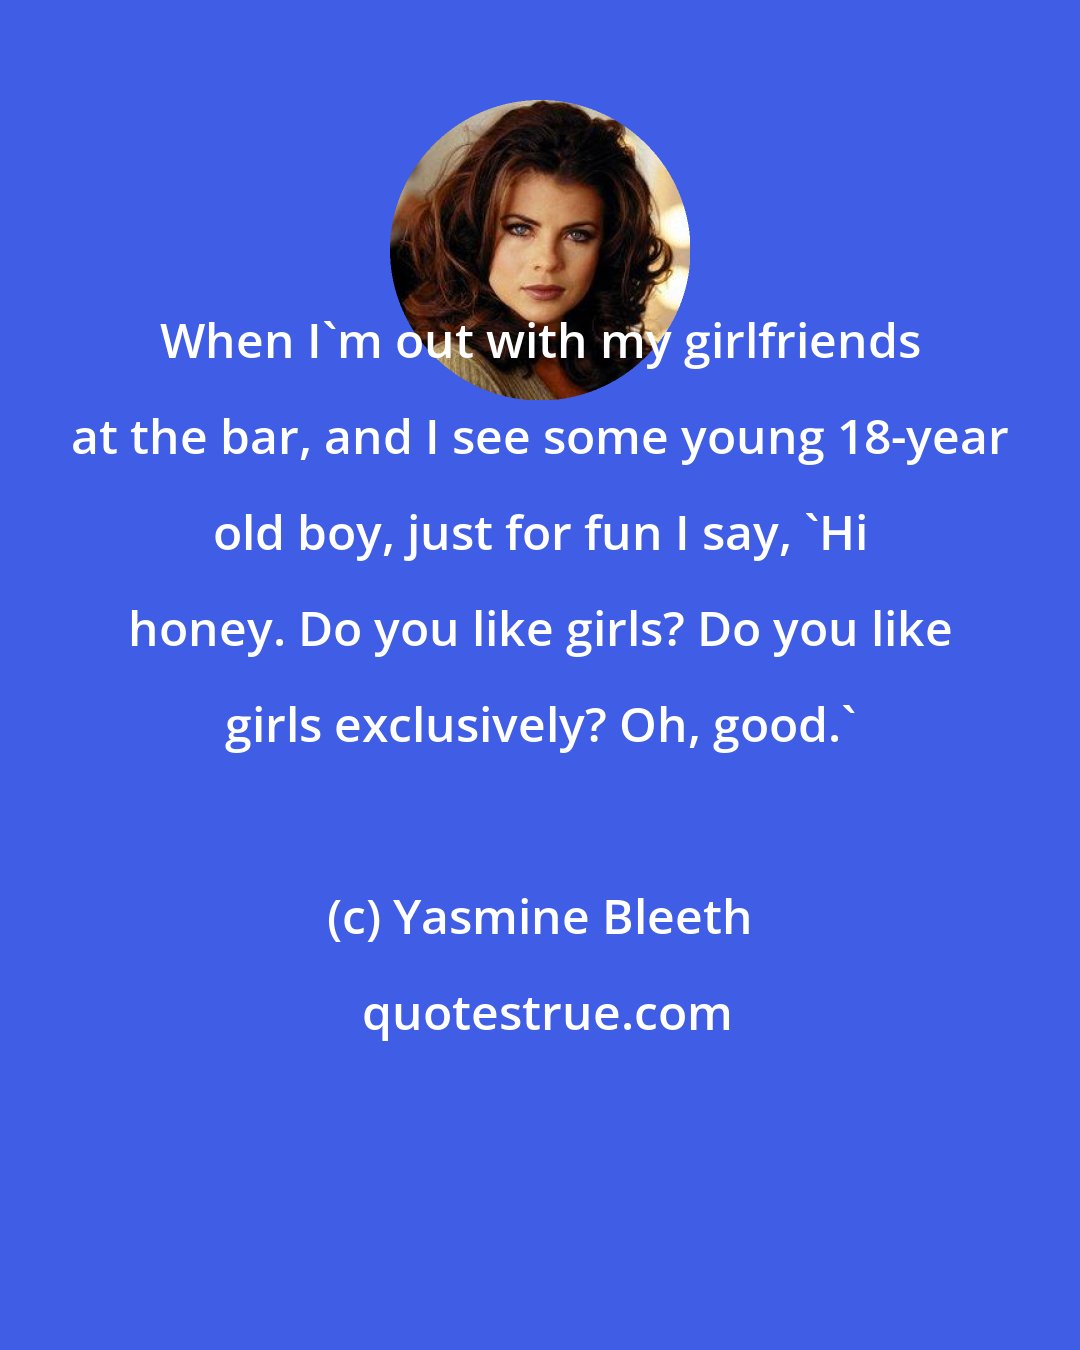 Yasmine Bleeth: When I'm out with my girlfriends at the bar, and I see some young 18-year old boy, just for fun I say, 'Hi honey. Do you like girls? Do you like girls exclusively? Oh, good.'